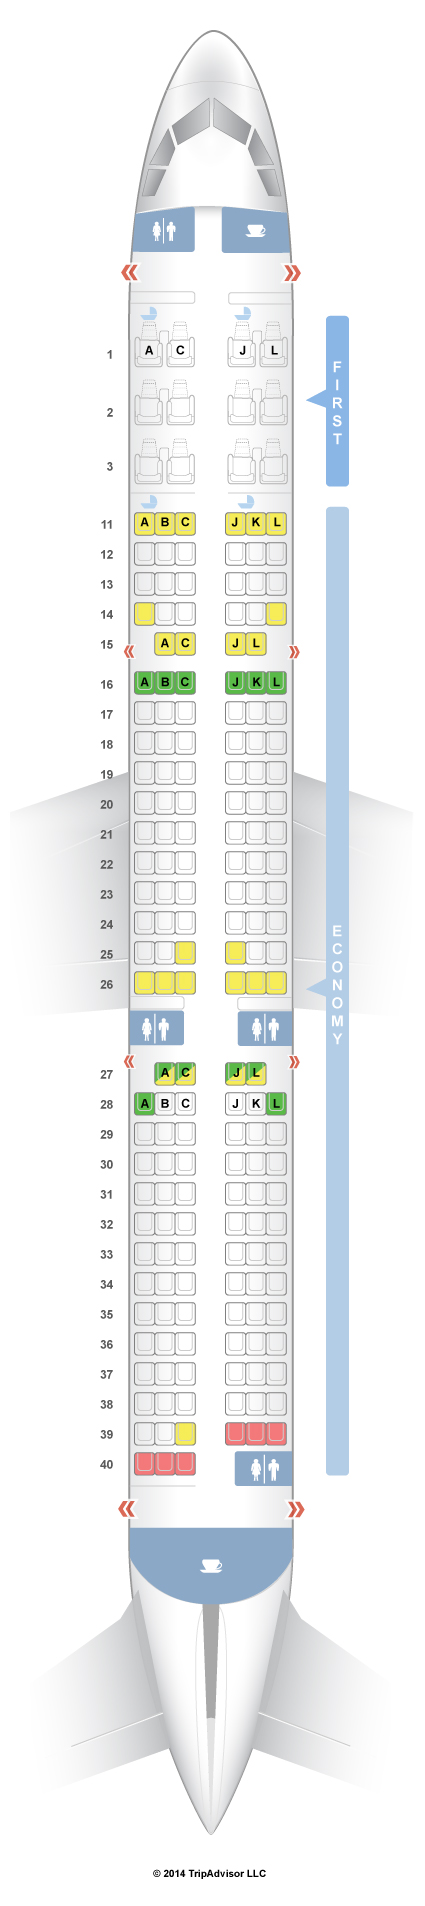 Airbus Industrie A321 Seating Chart